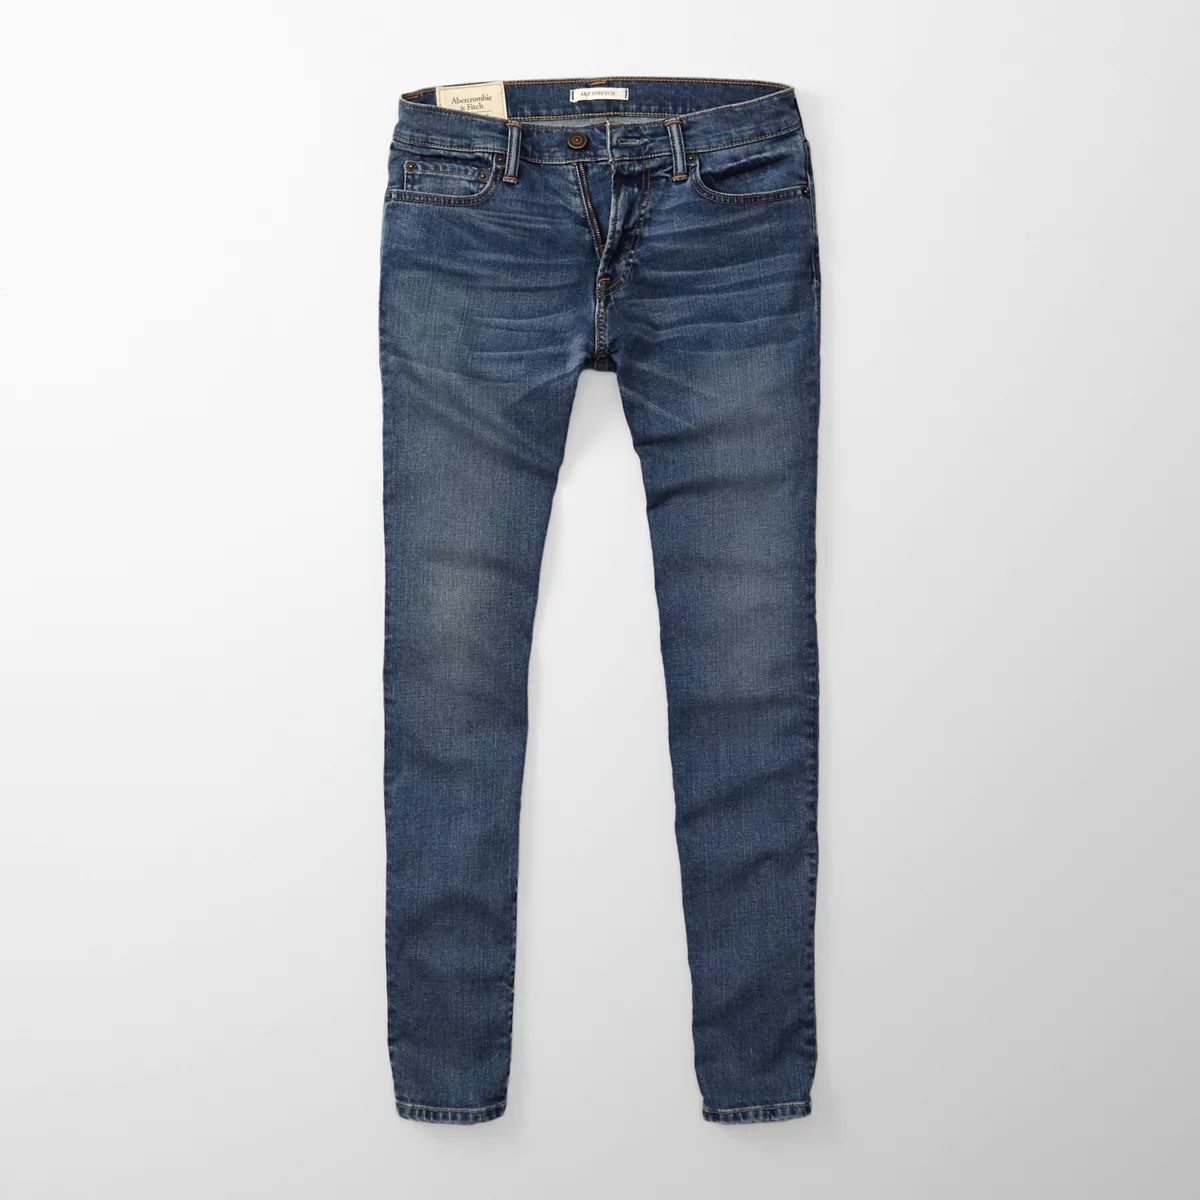 Super Skinny Jeans | Abercrombie & Fitch US & UK